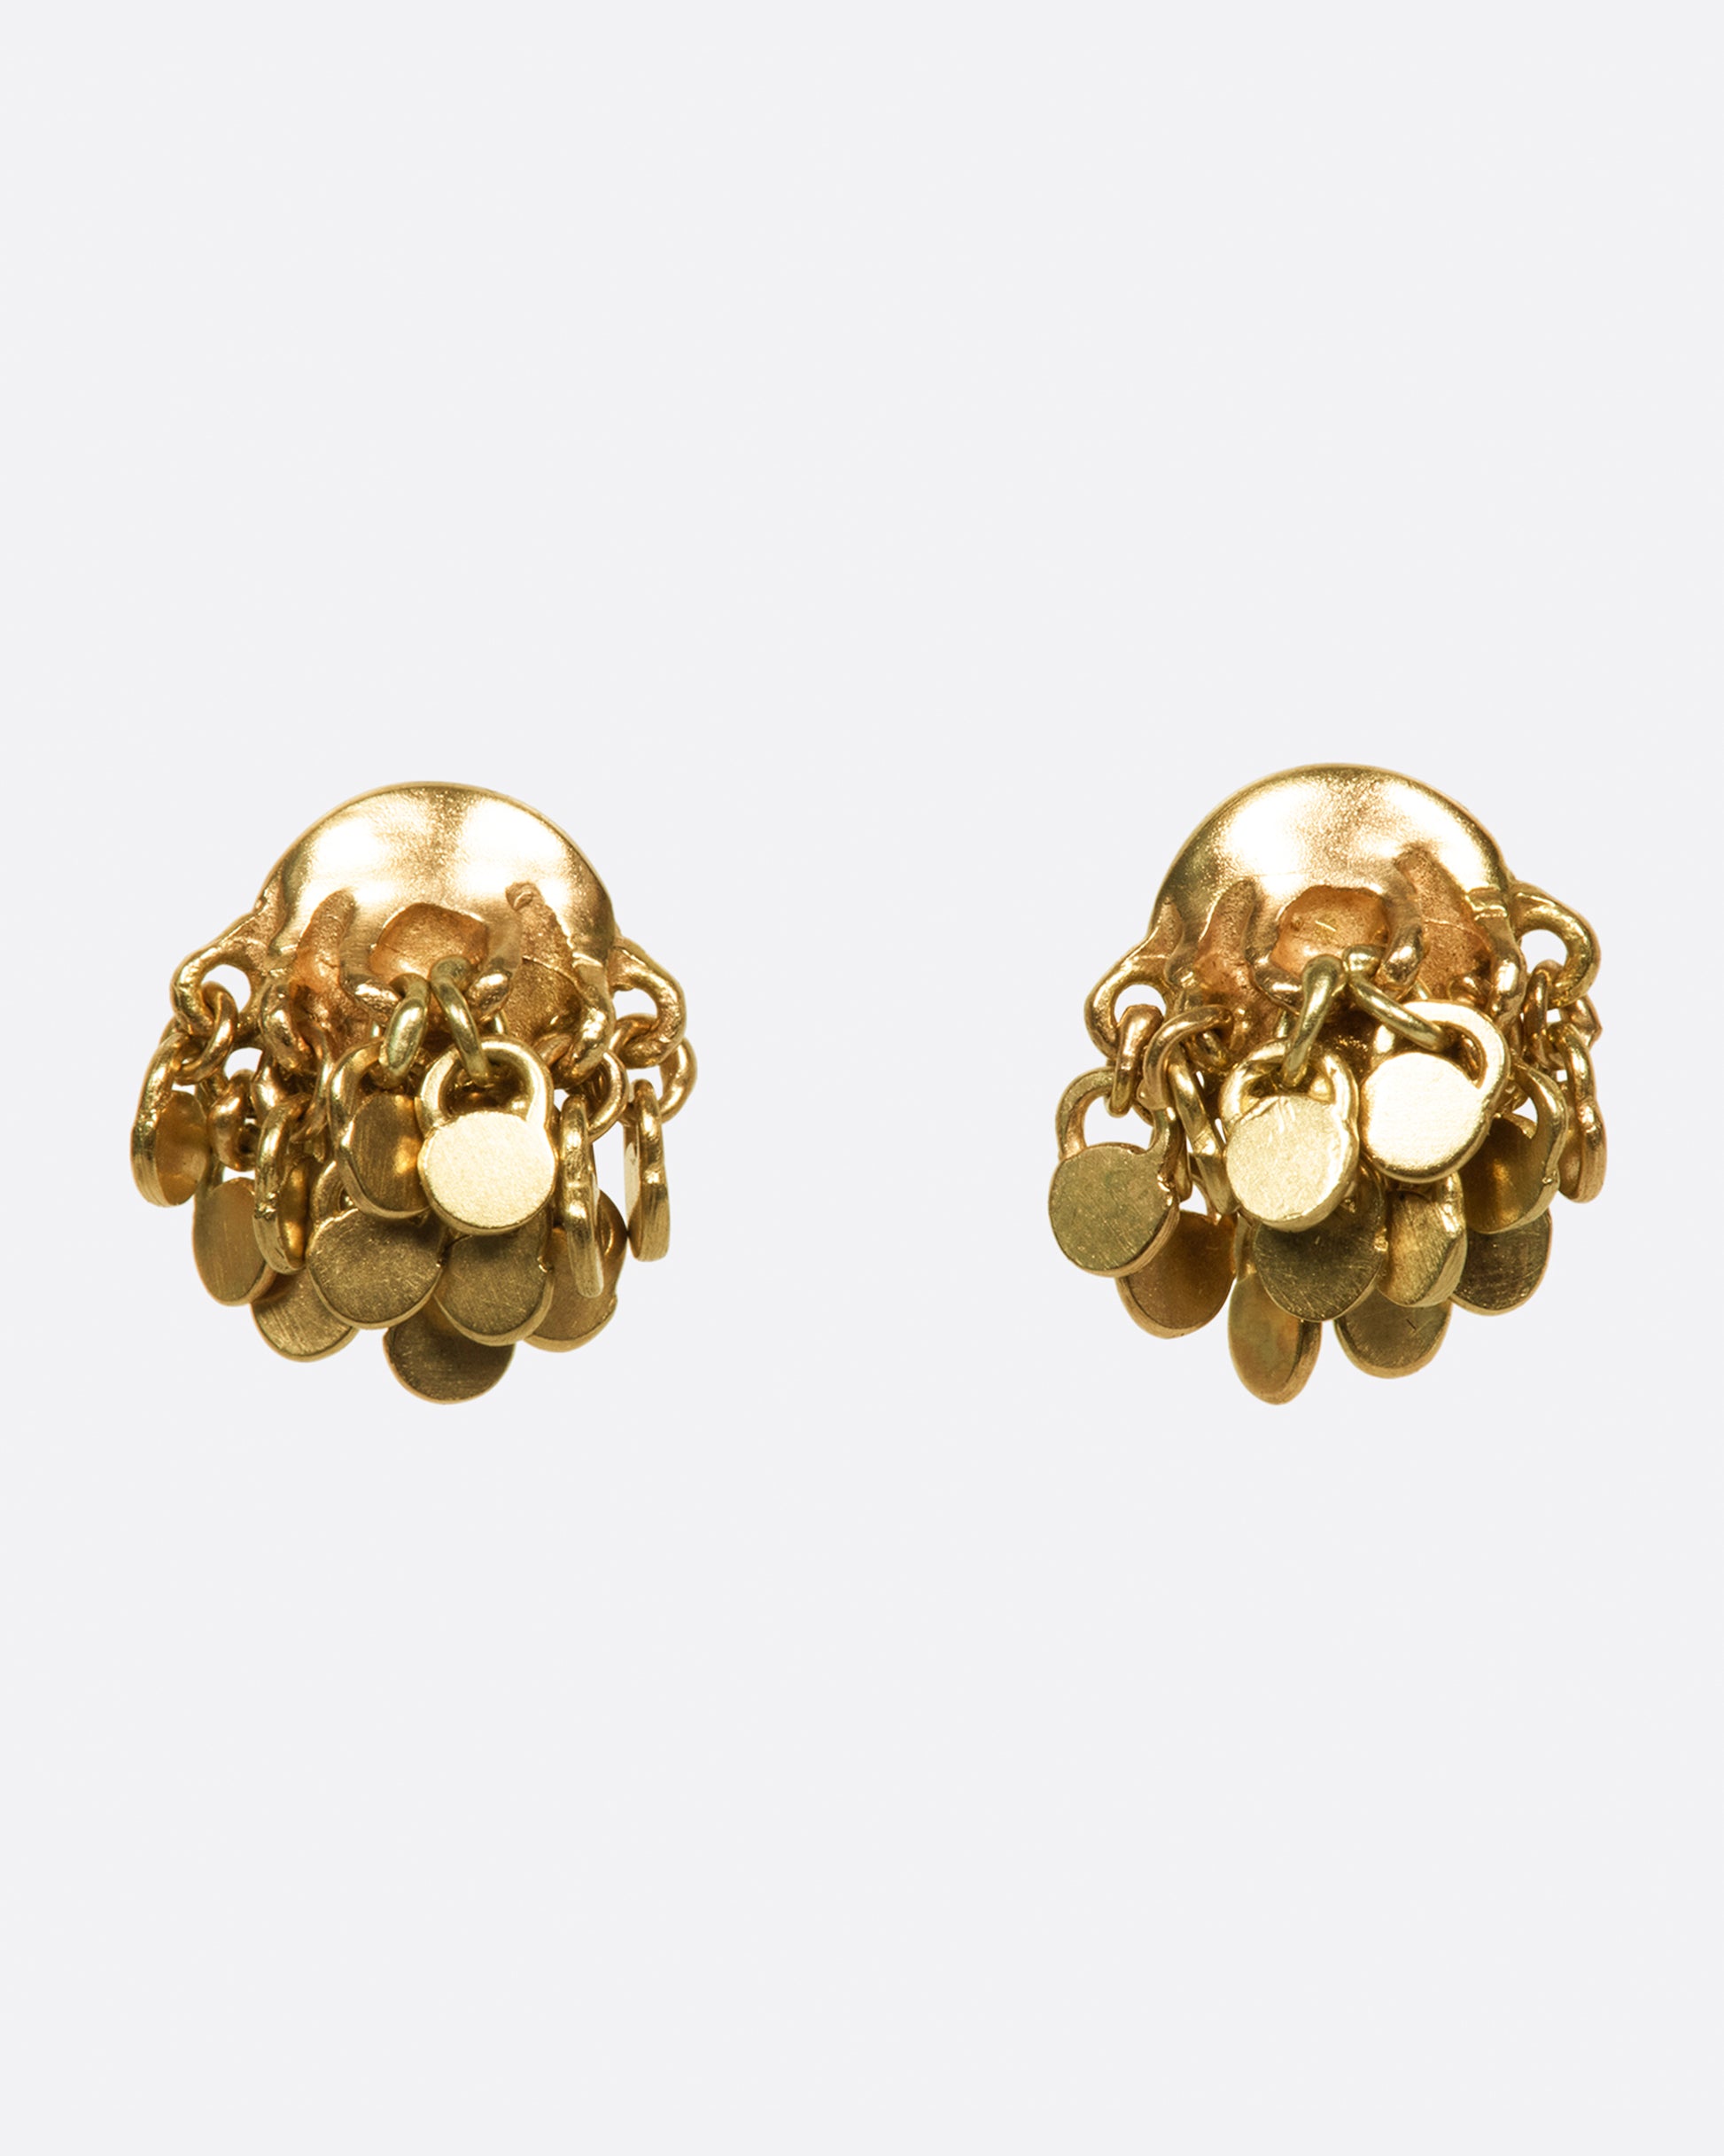 A pair of gold disc stude arrings adorned with sequin dangles, shown from the front.